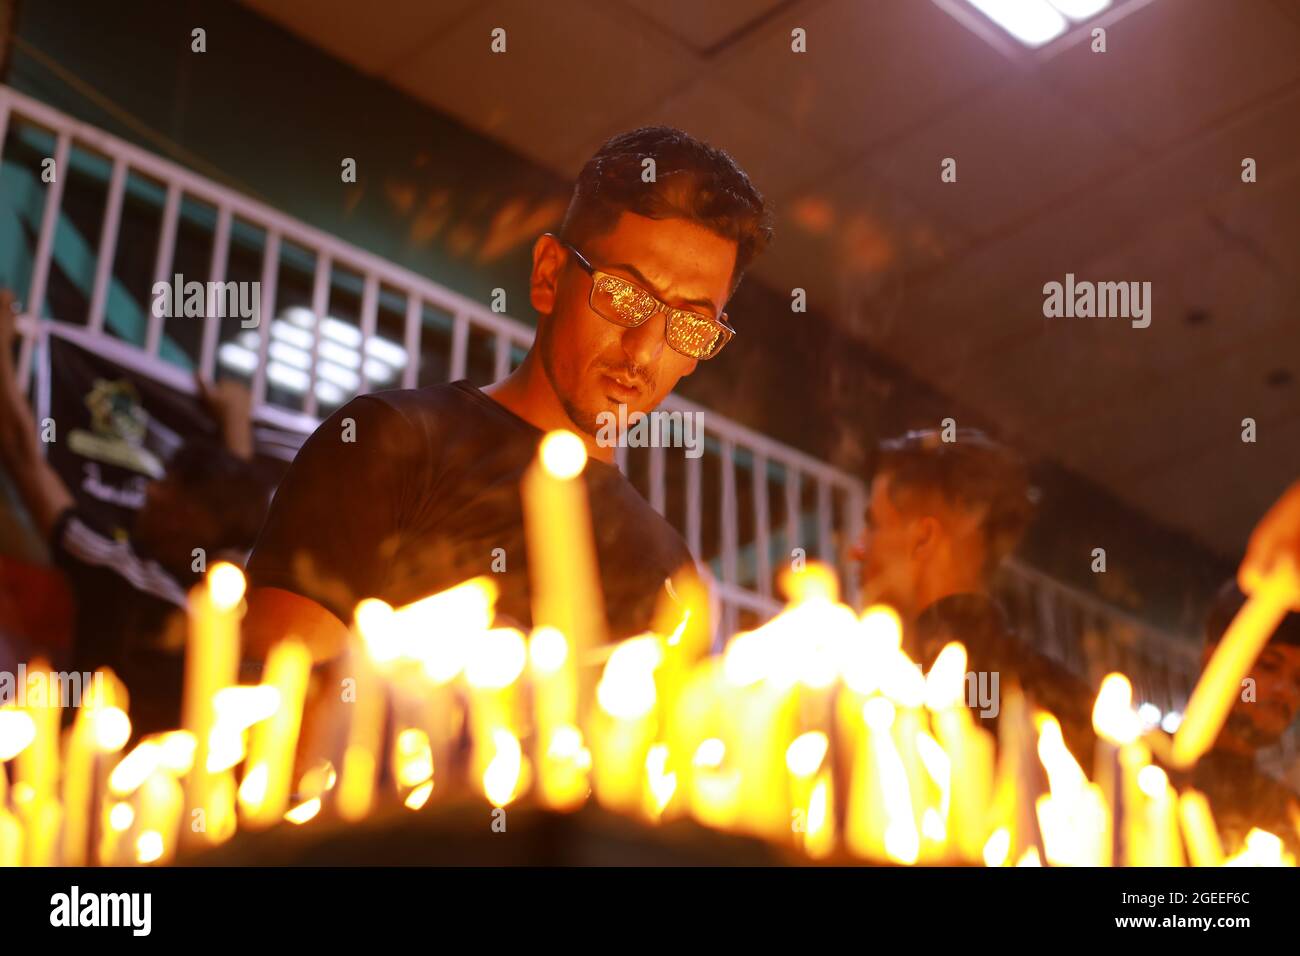 Karbala, Iraq. 19th Aug, 2021. A Shiite Muslim man lights candles at the Imam Abbas shrine in Iraq's holy city of Karbala on Ashura Day on the 10th of Muharram, the first month of the Islamic calendar. Muharram is considered a month of mourning and remembrance for Shiite Muslims around the world, in which they commemorate the martyrdom of the grandson of the Islamic prophet Mohammad, Husayn ibn Ali, who was killed in the 7th century Battle of Karbala. Credit: Ameer Al Mohammedaw/dpa/Alamy Live News Stock Photo